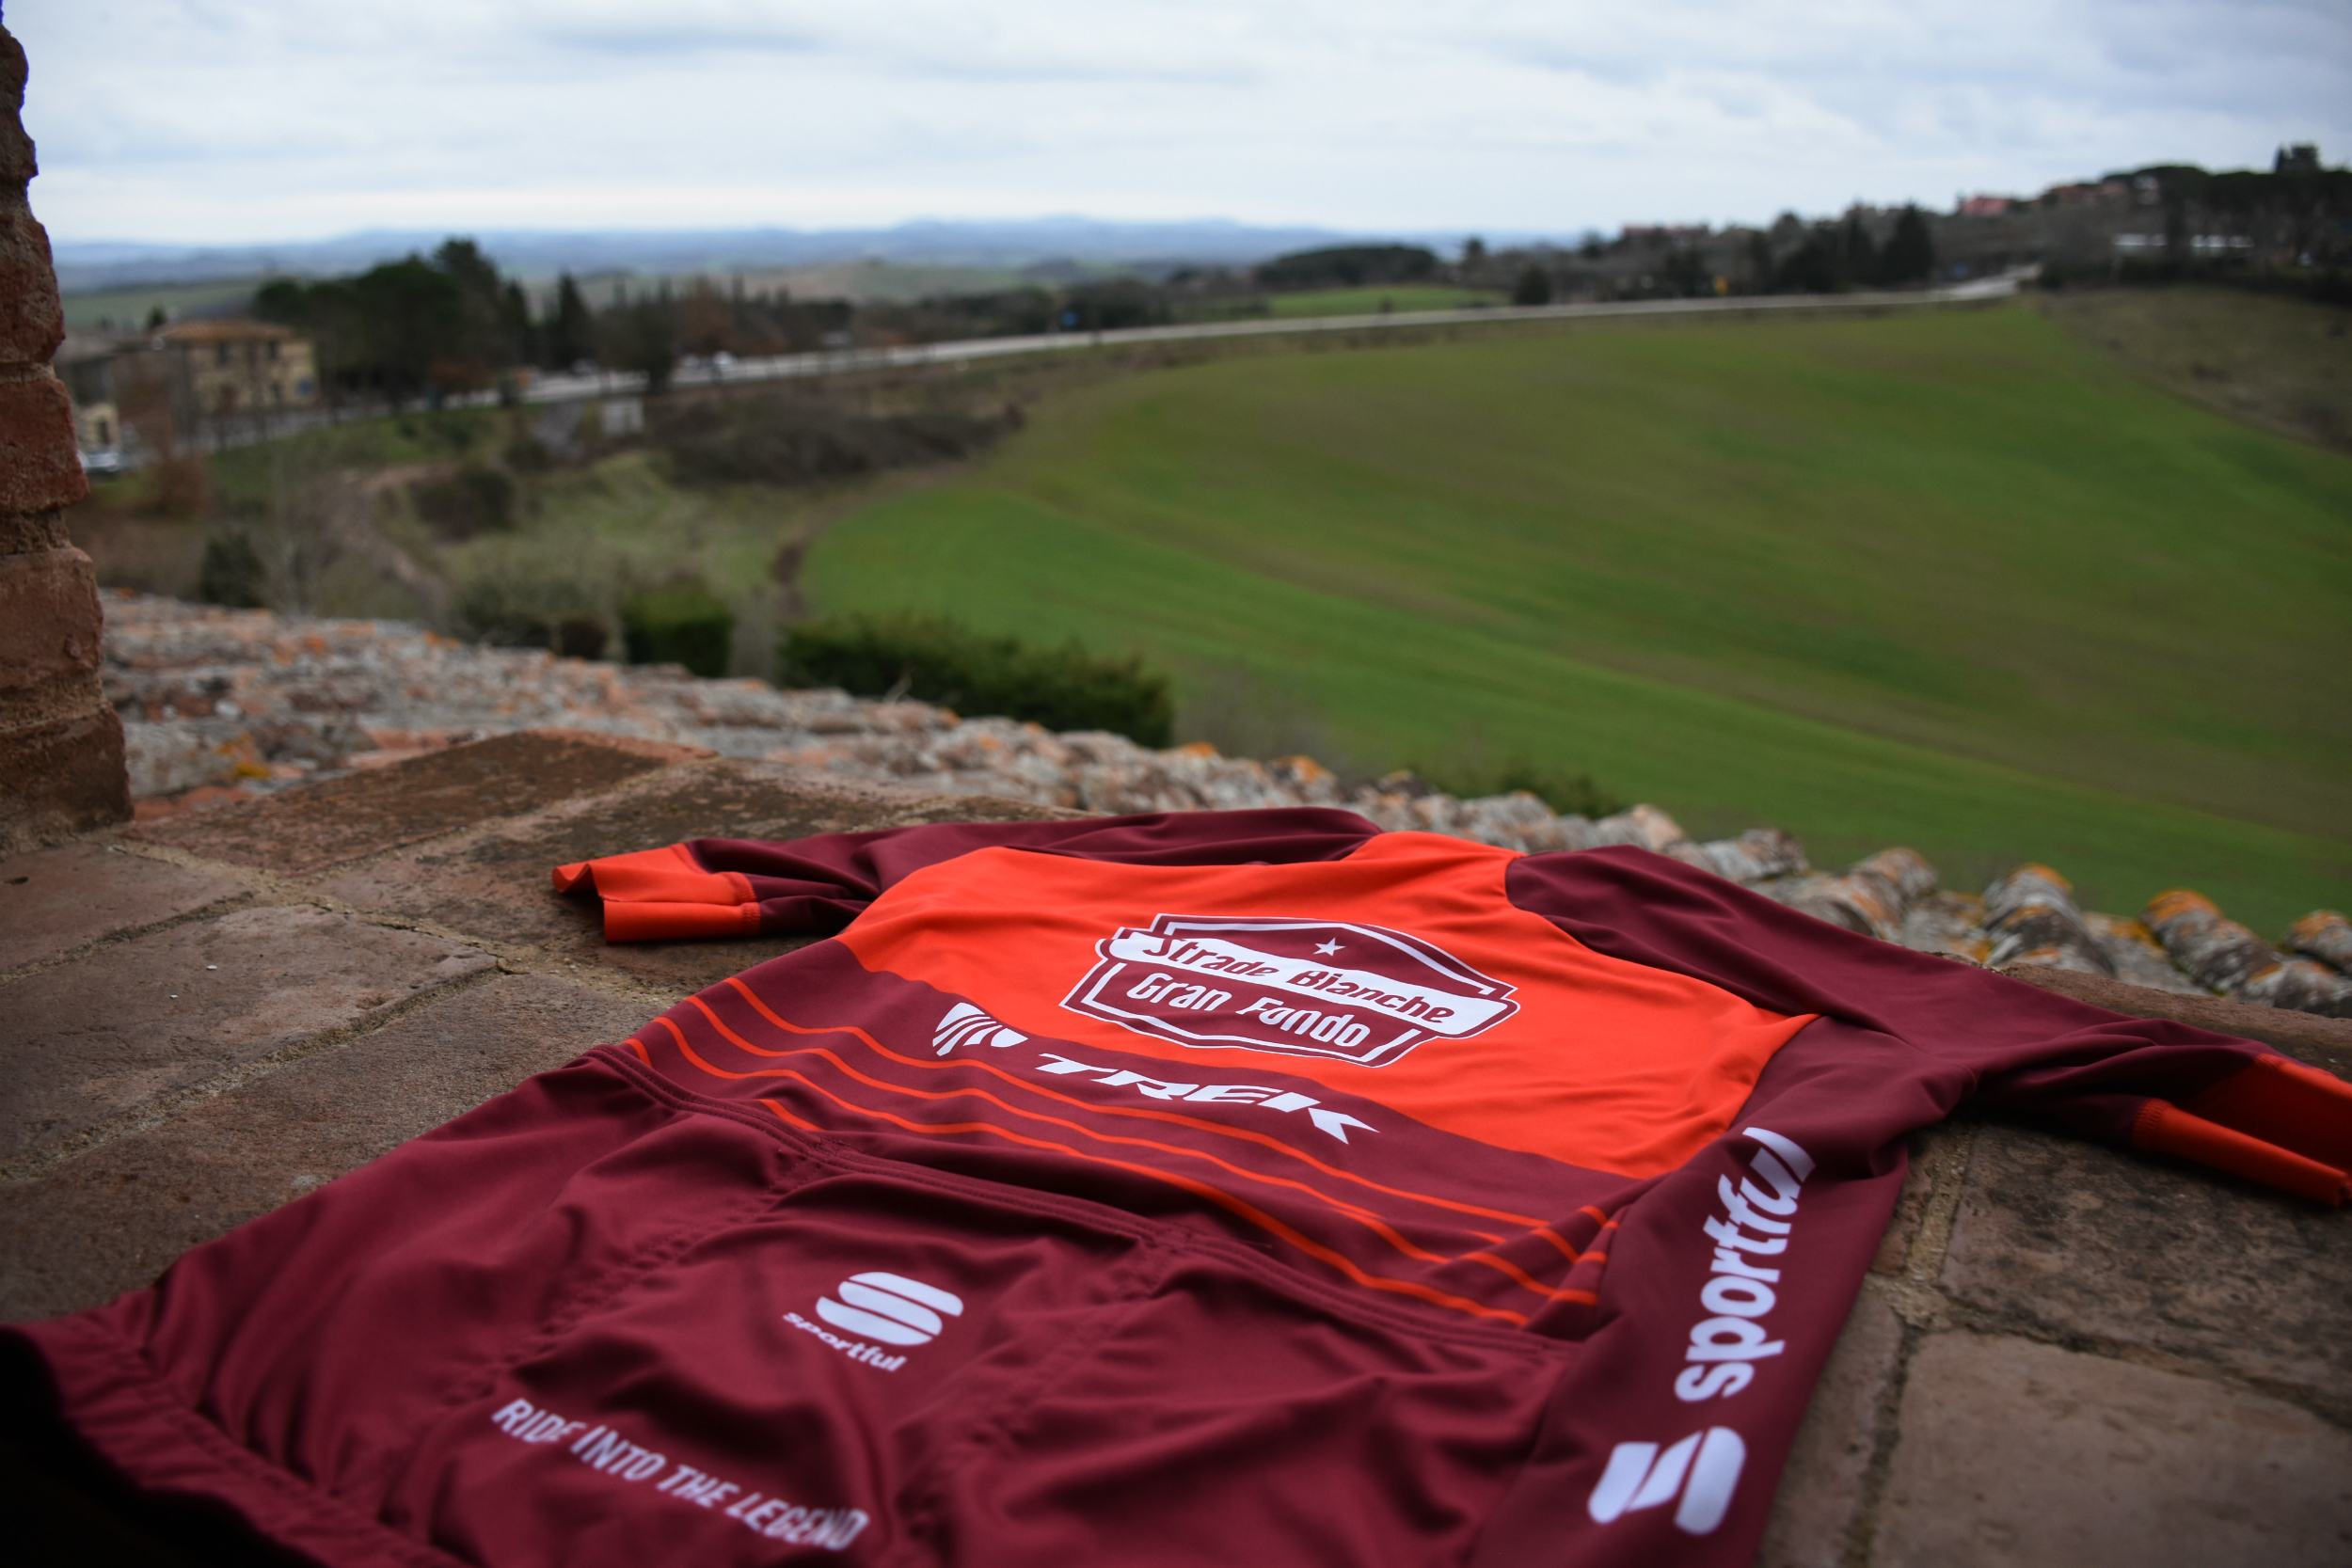 The bodyfit pro classics jersey face down on a windowsill, displaying the back of the jersey.